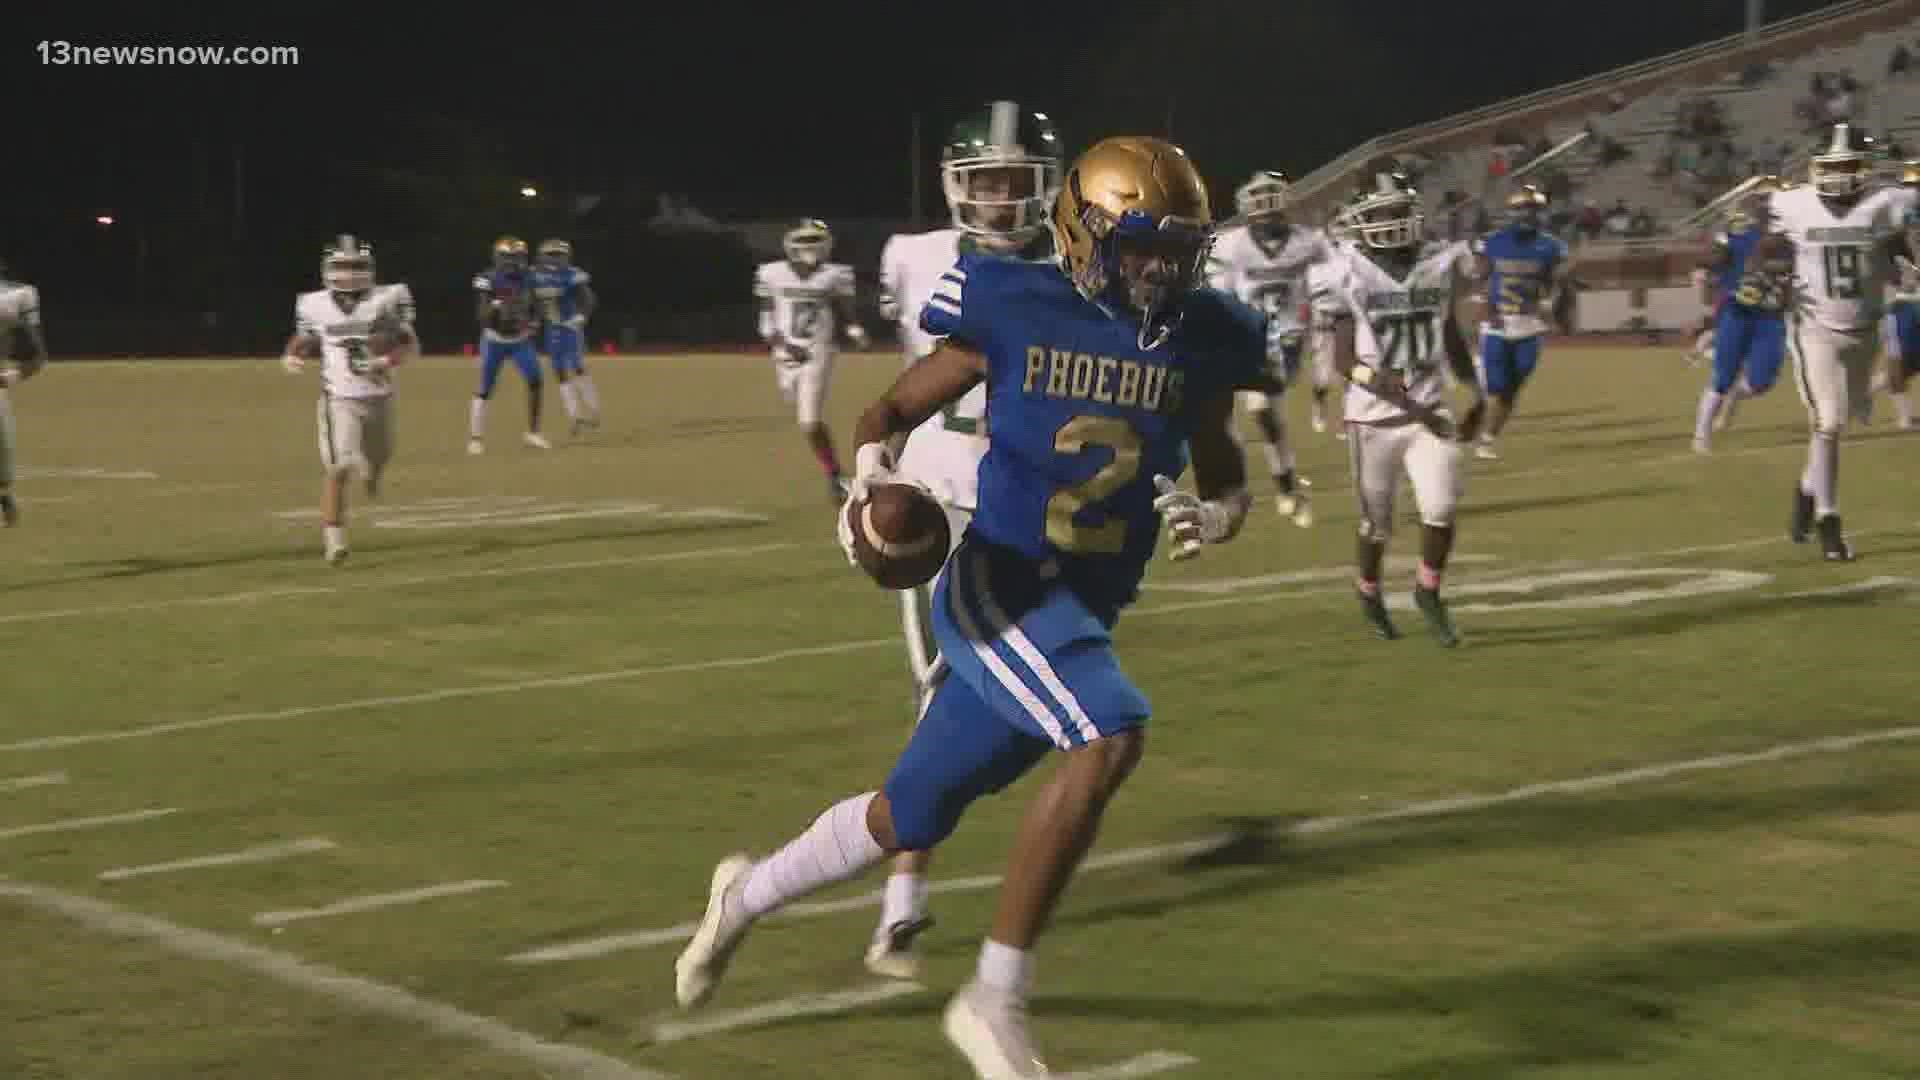 Phoebus won easily over Kecoughtan and Warwick  blanked Heritage 18-0.